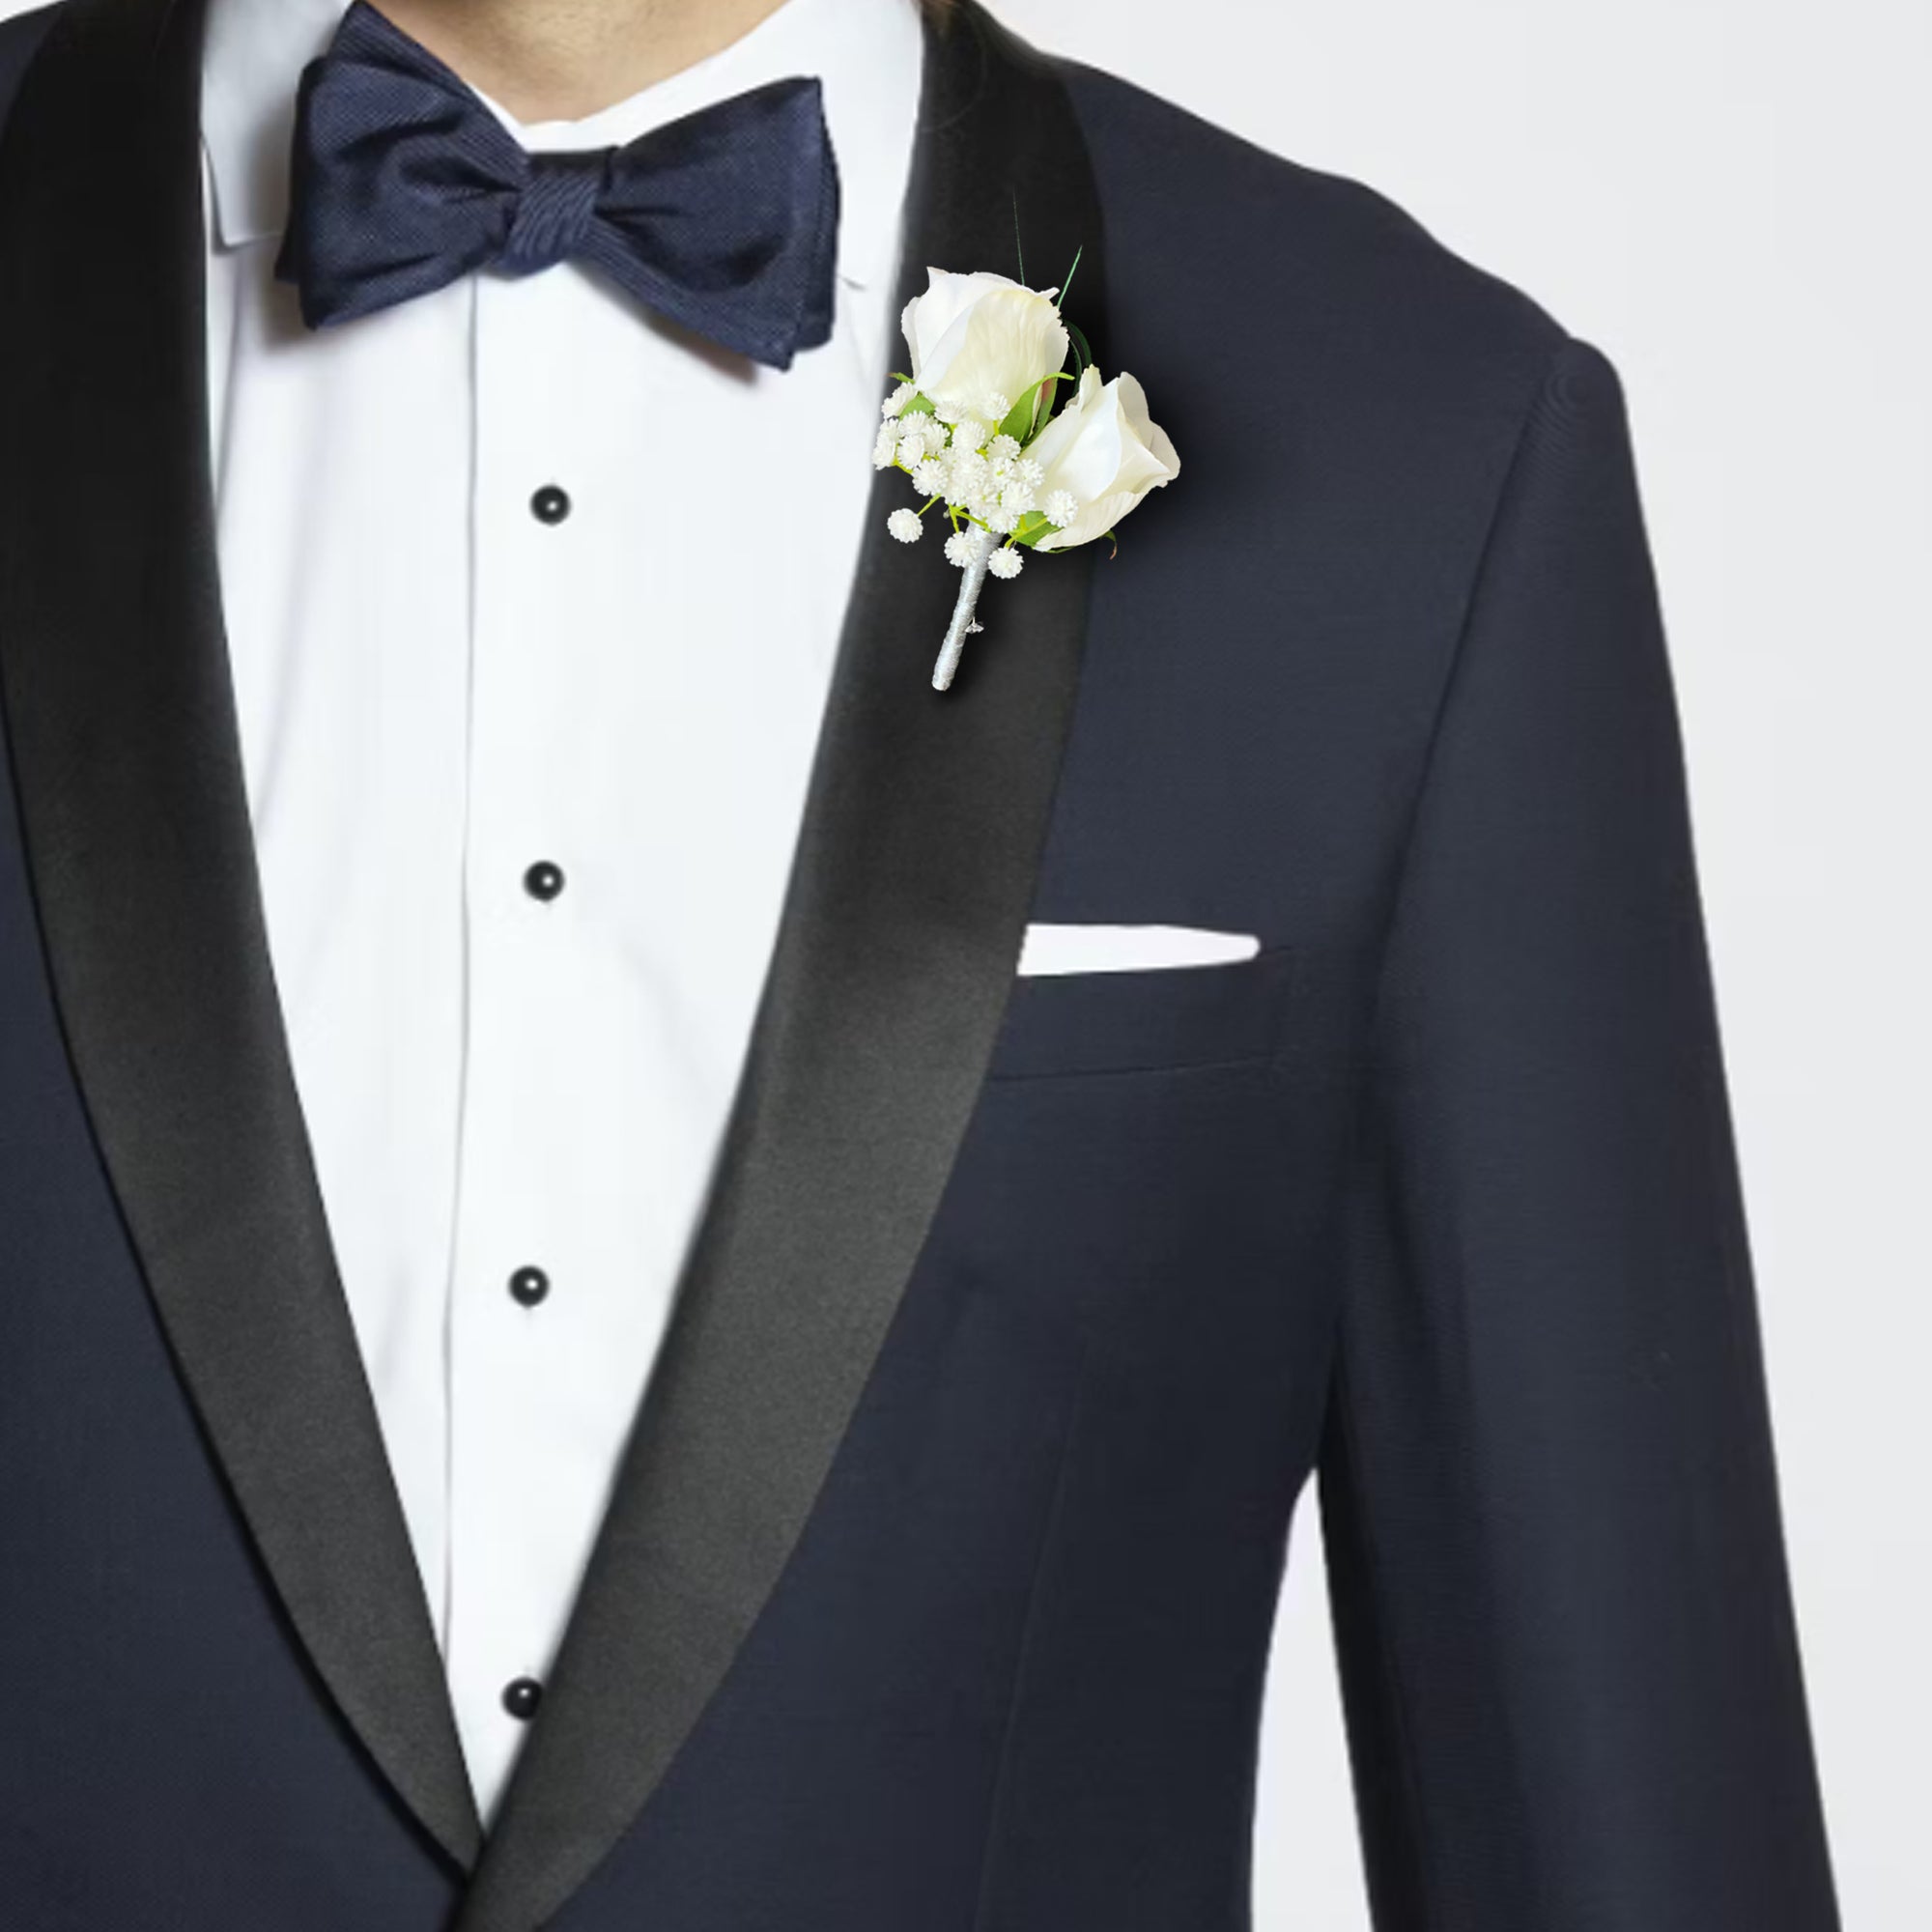 White Boutonniere Fake Rose Boutineer for Groom Best Man